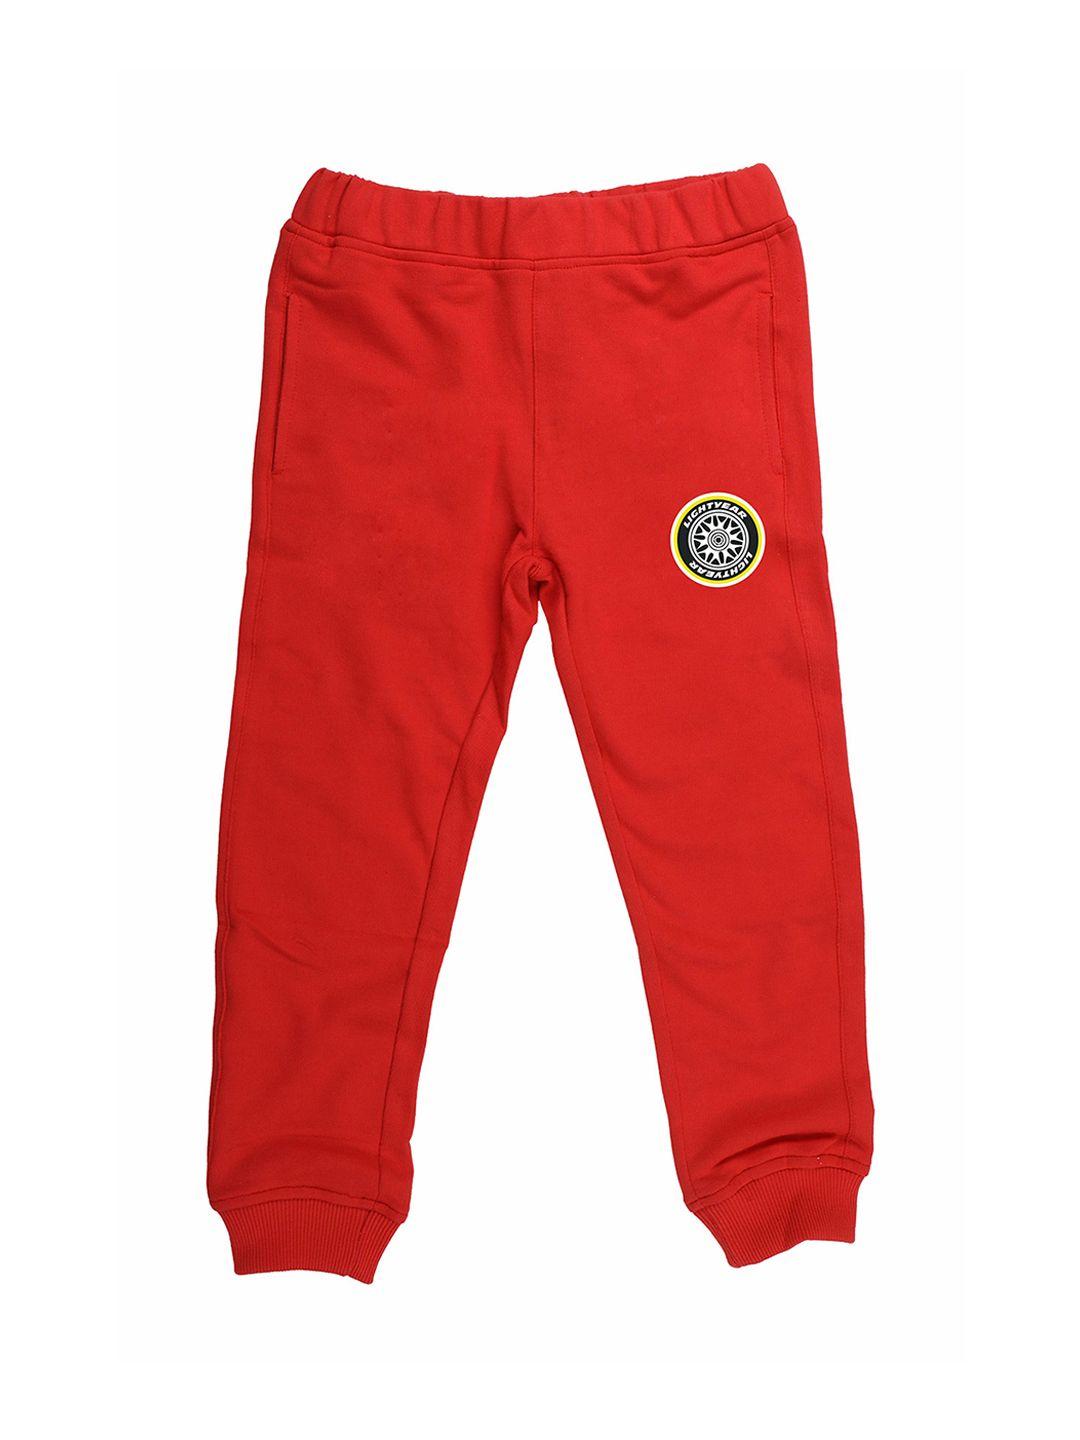 disney by wear your mind kids red regular fit solid joggers